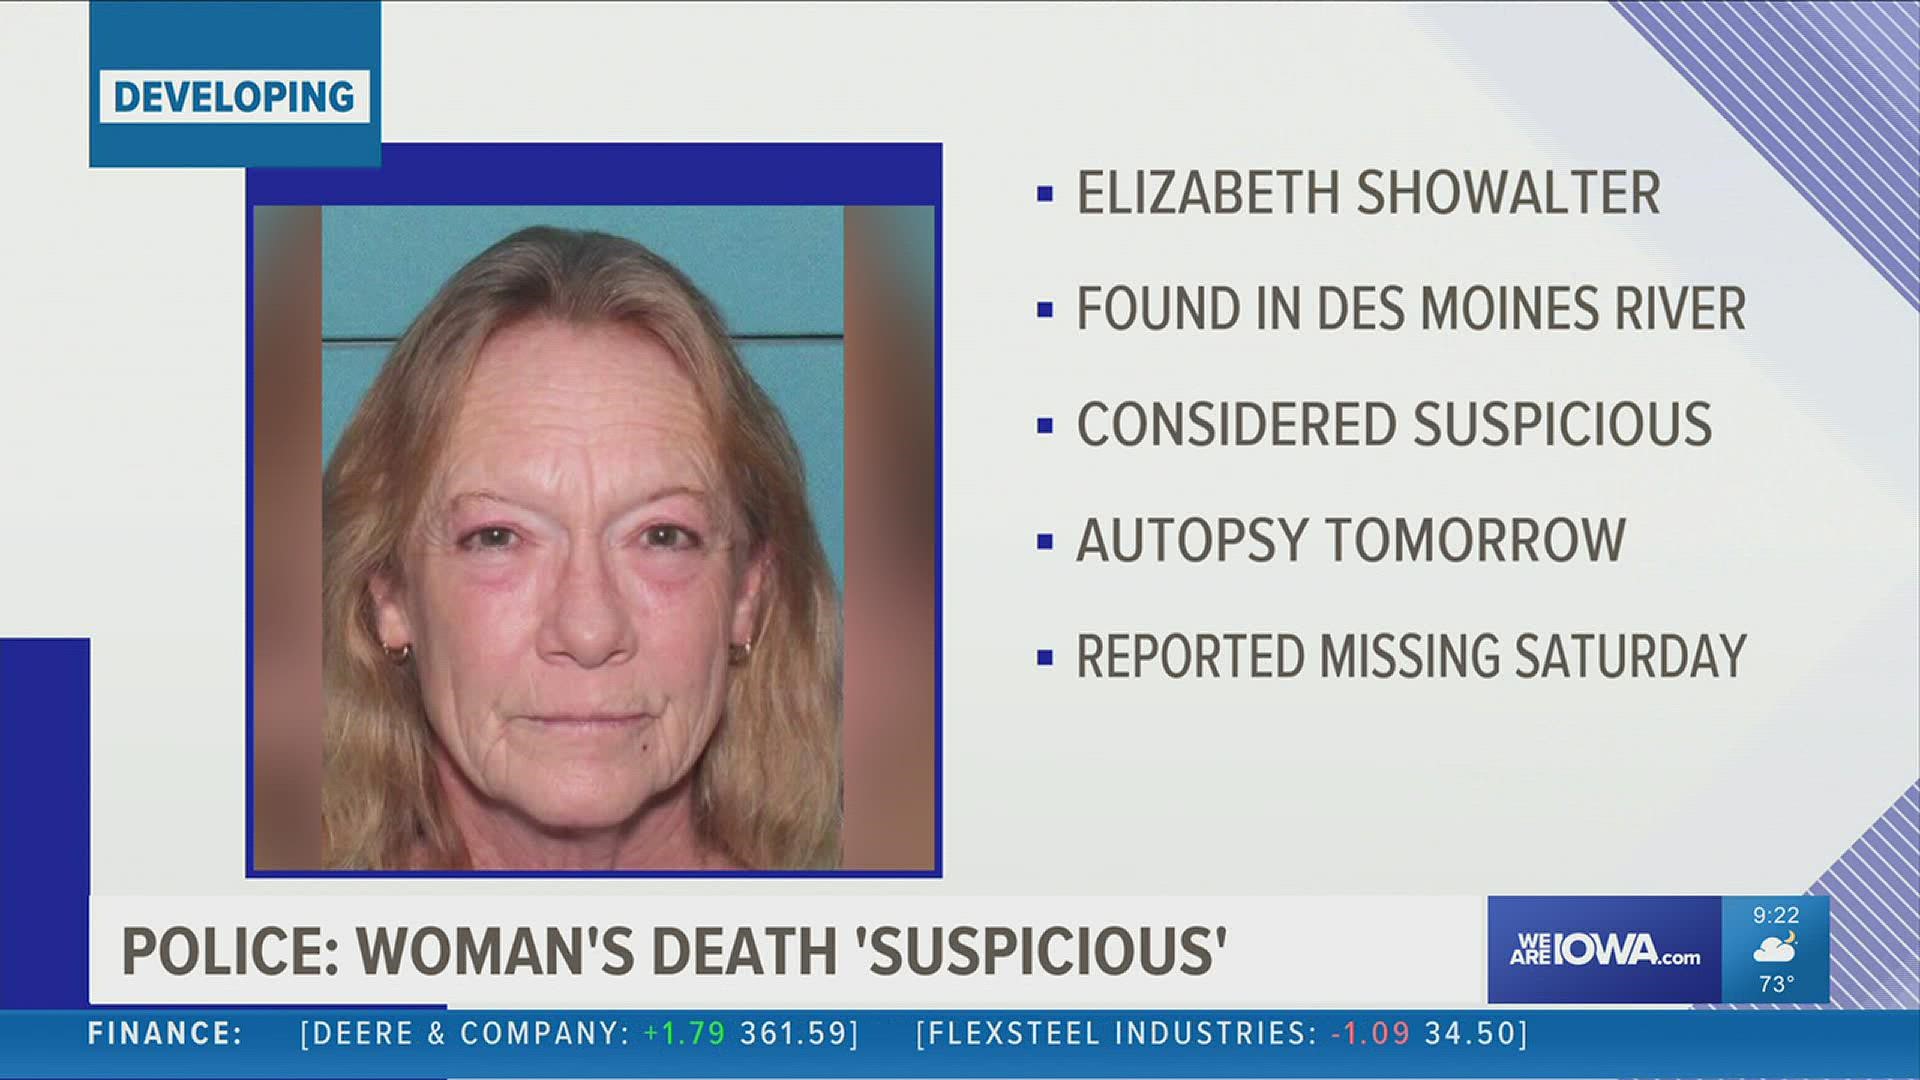 60-year-old Helen Elizabeth Showalter was reported missing Saturday.